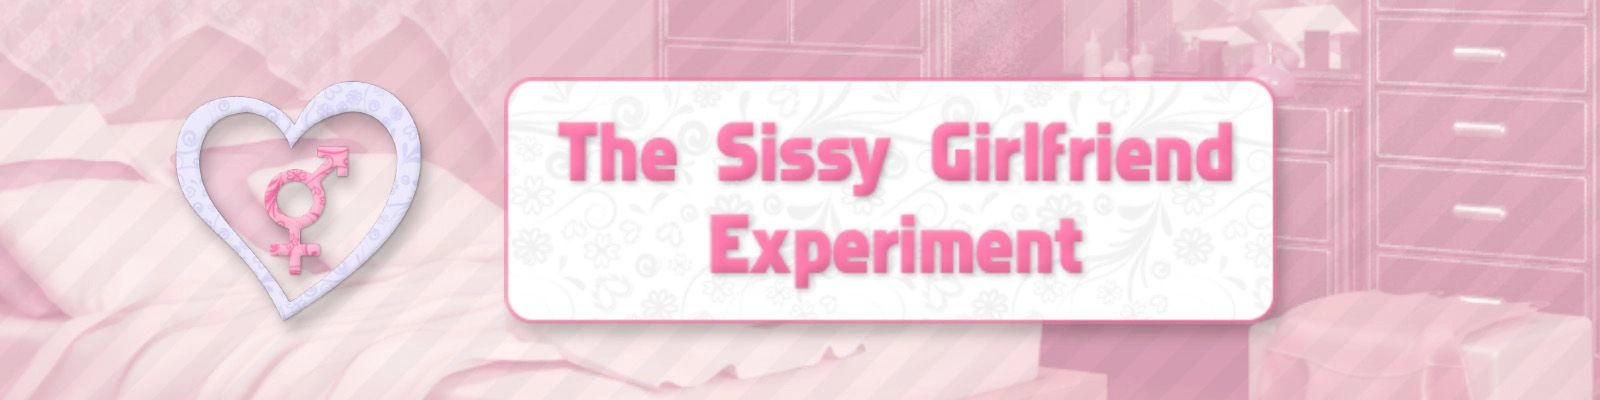 The Sissy Girlfriend Experiment [v0.5.4] main image